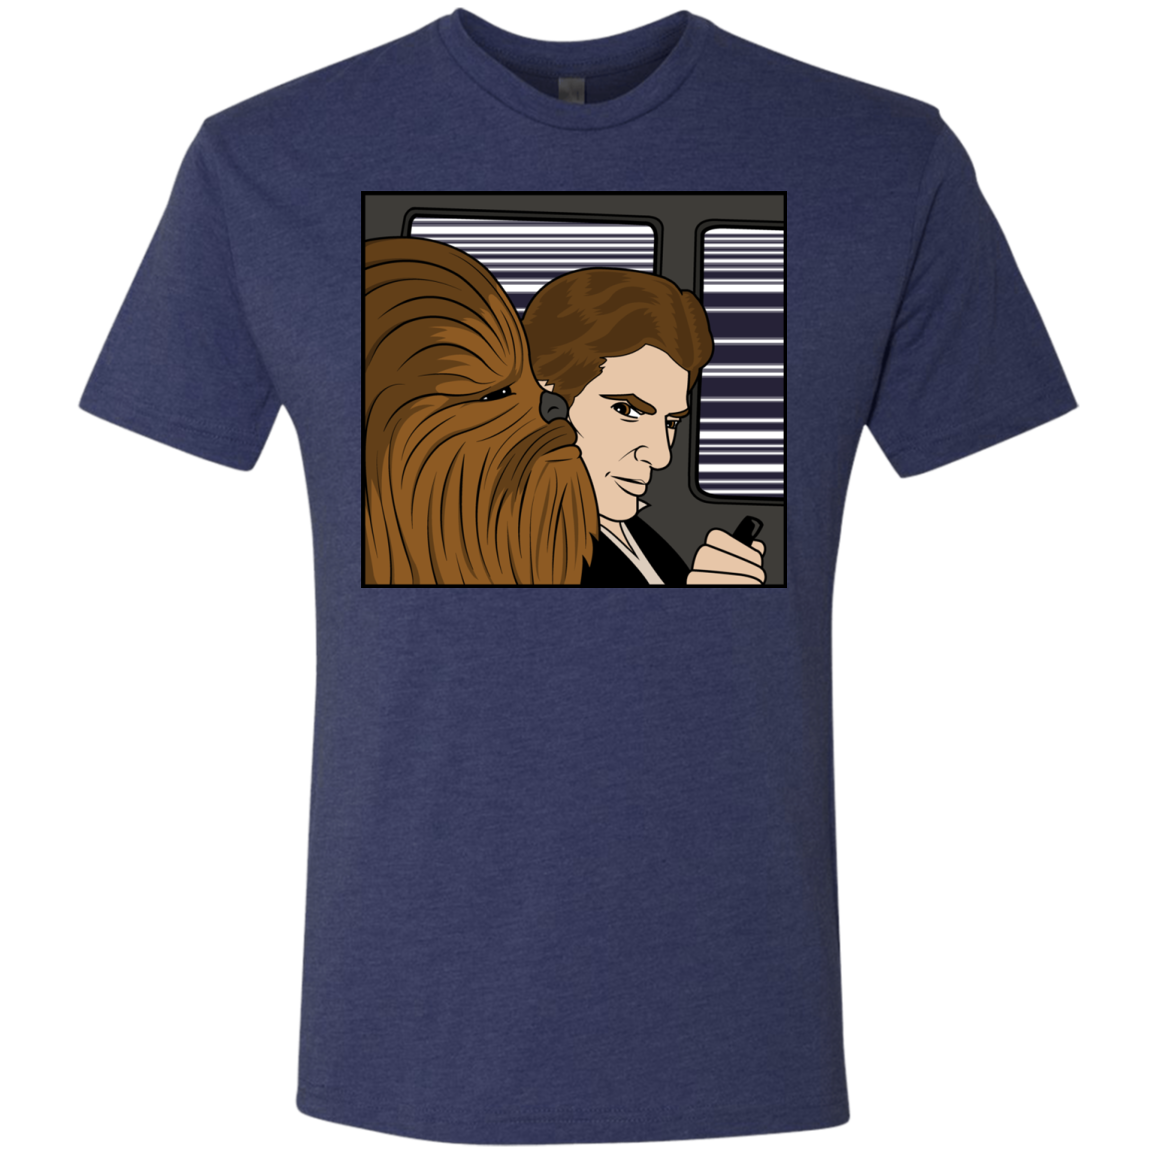 In the Falcon! Men's Triblend T-Shirt